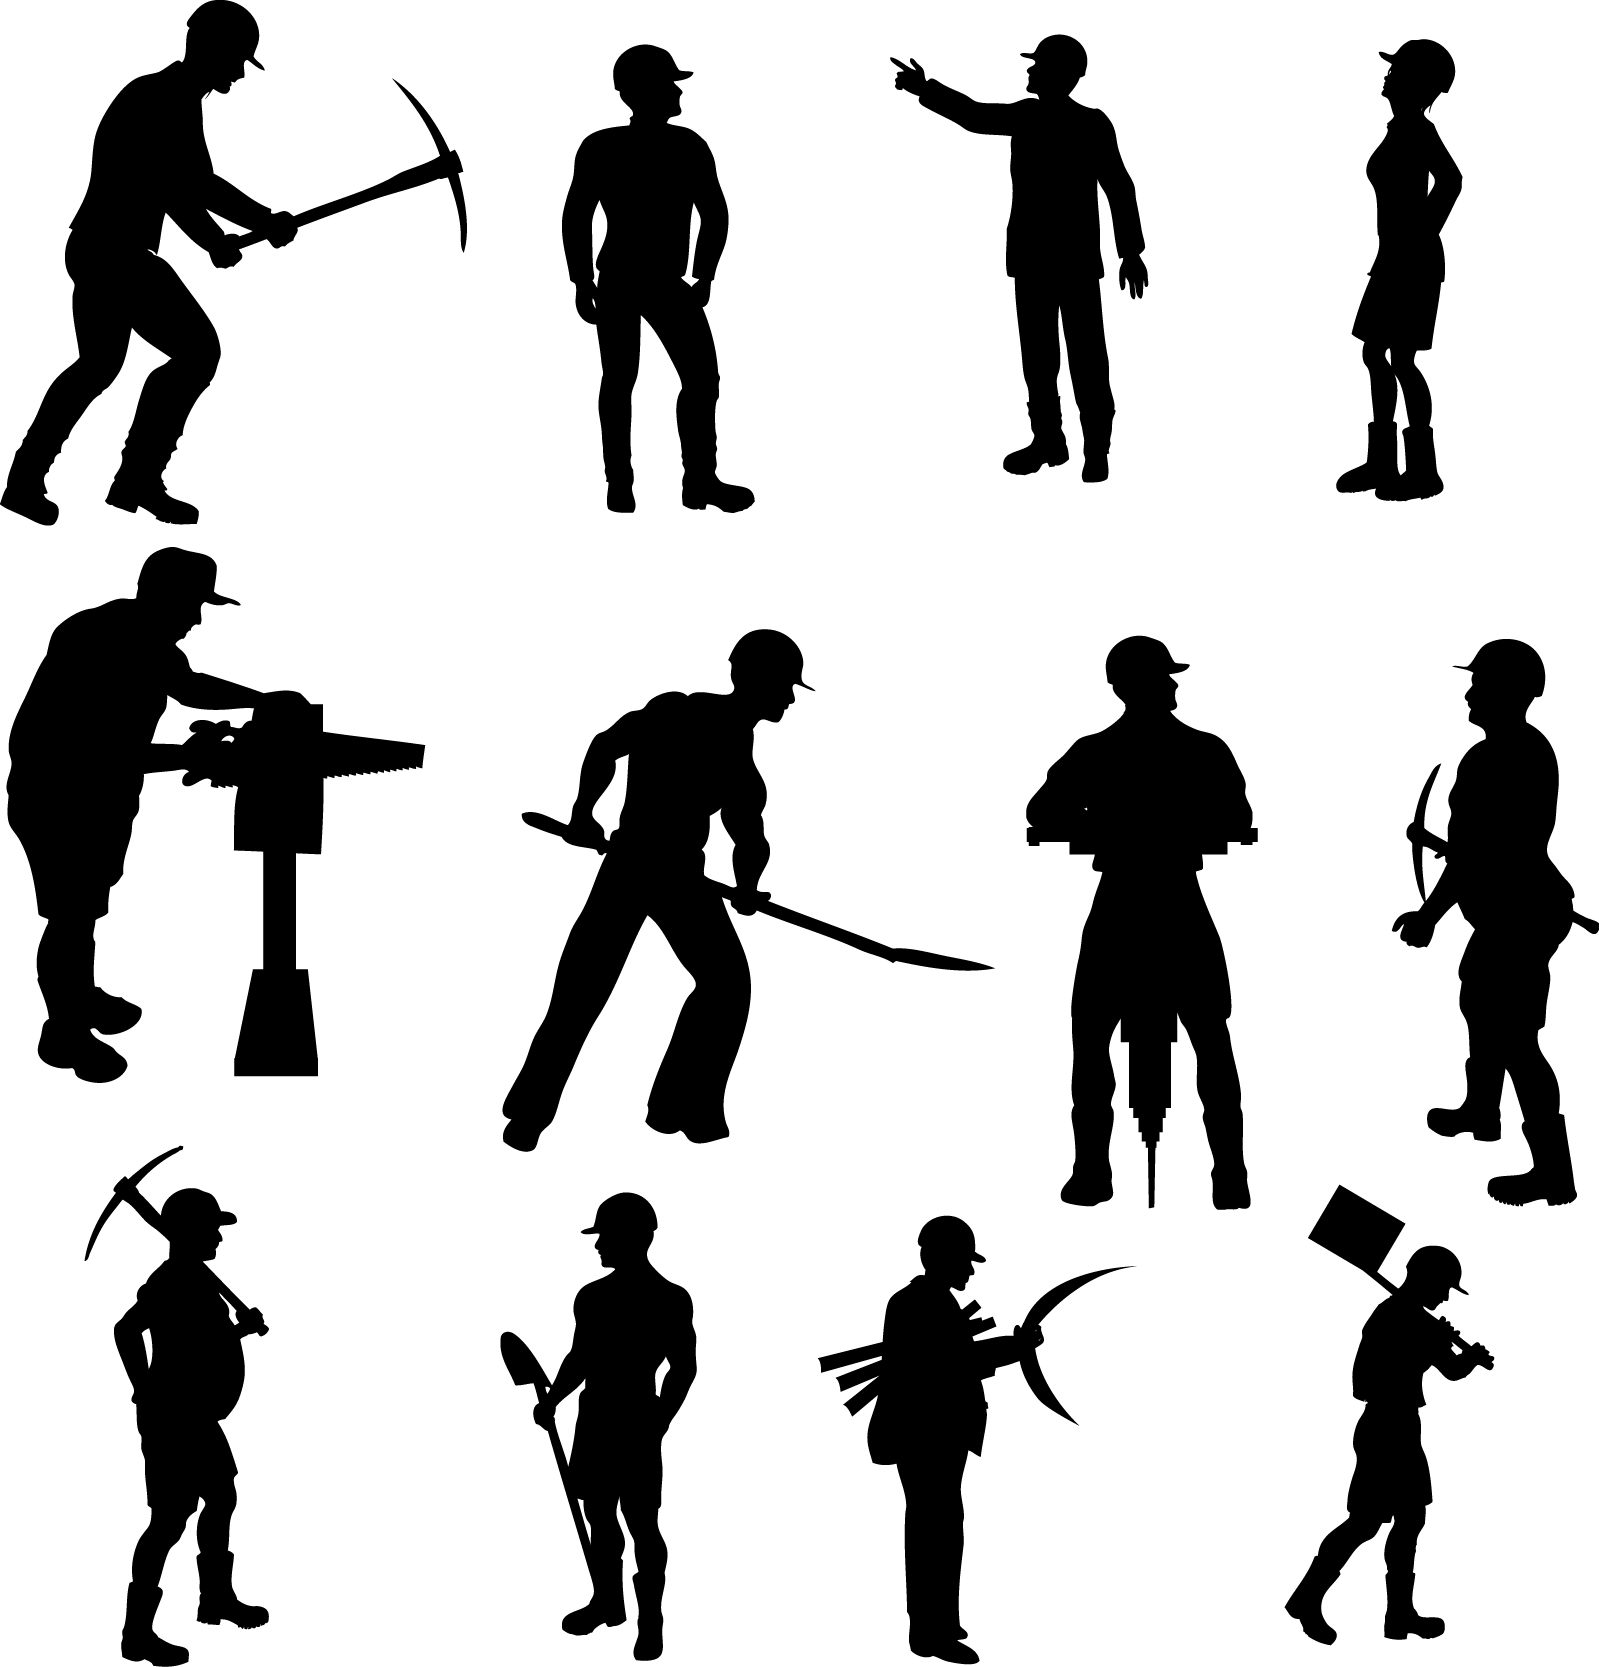 Workers Silhouettes Set 01